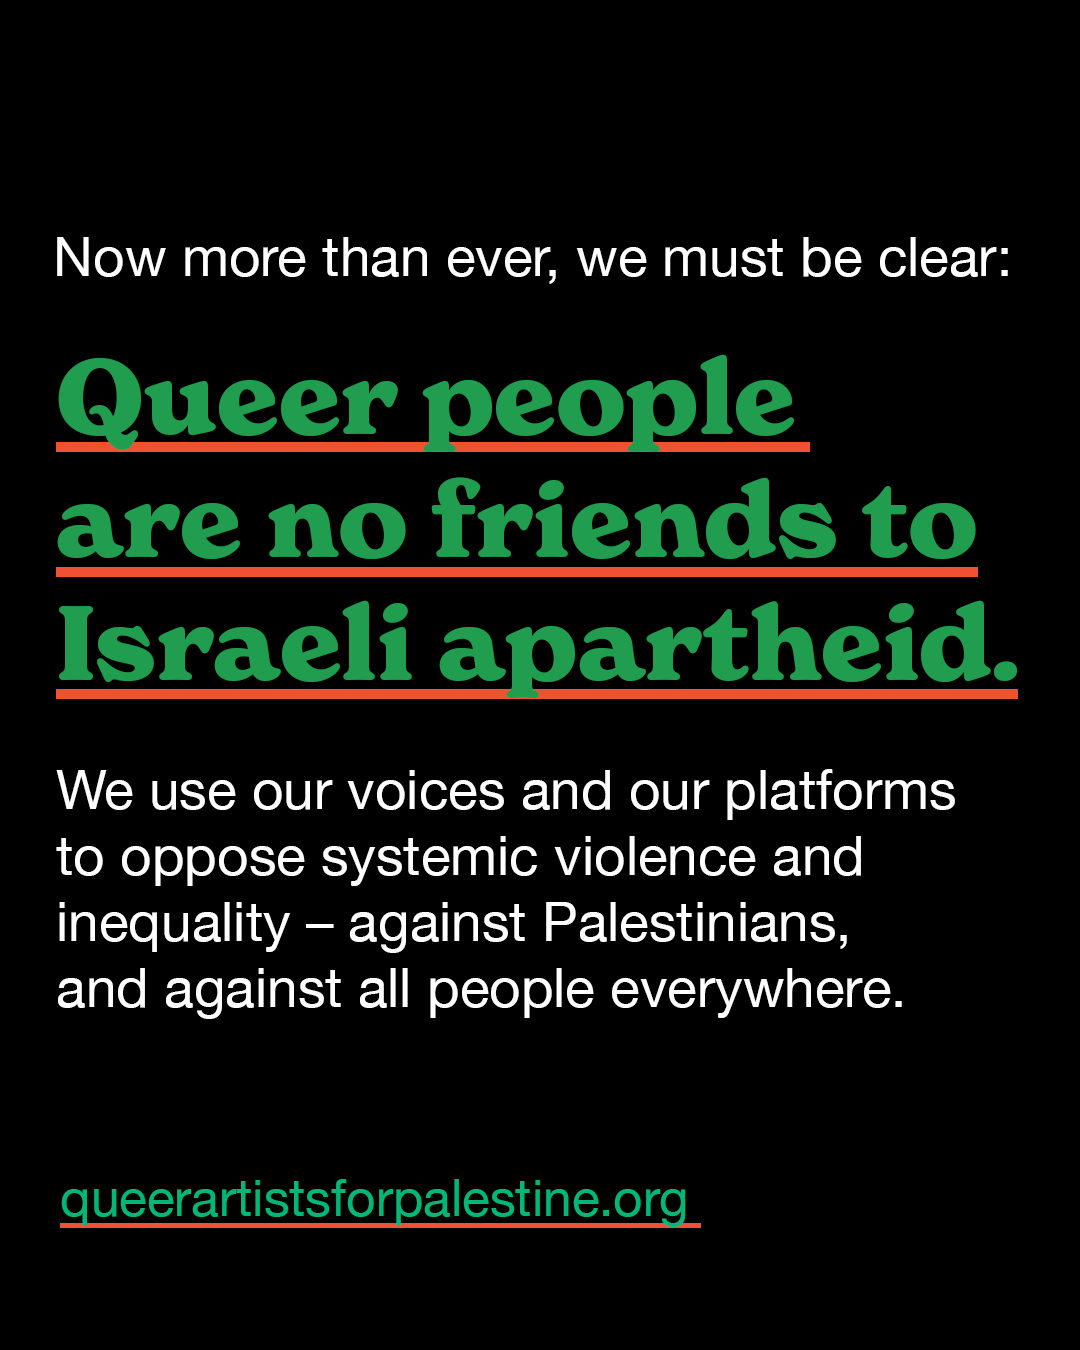 Now more than ever, we must be clear; Queer people are no friends to Isreali apartheid. We use our voices ad our platforms to opposed systemic violence and inequality - against Palestinians, and against all people everywhere. queerartistsforpalestine.org 